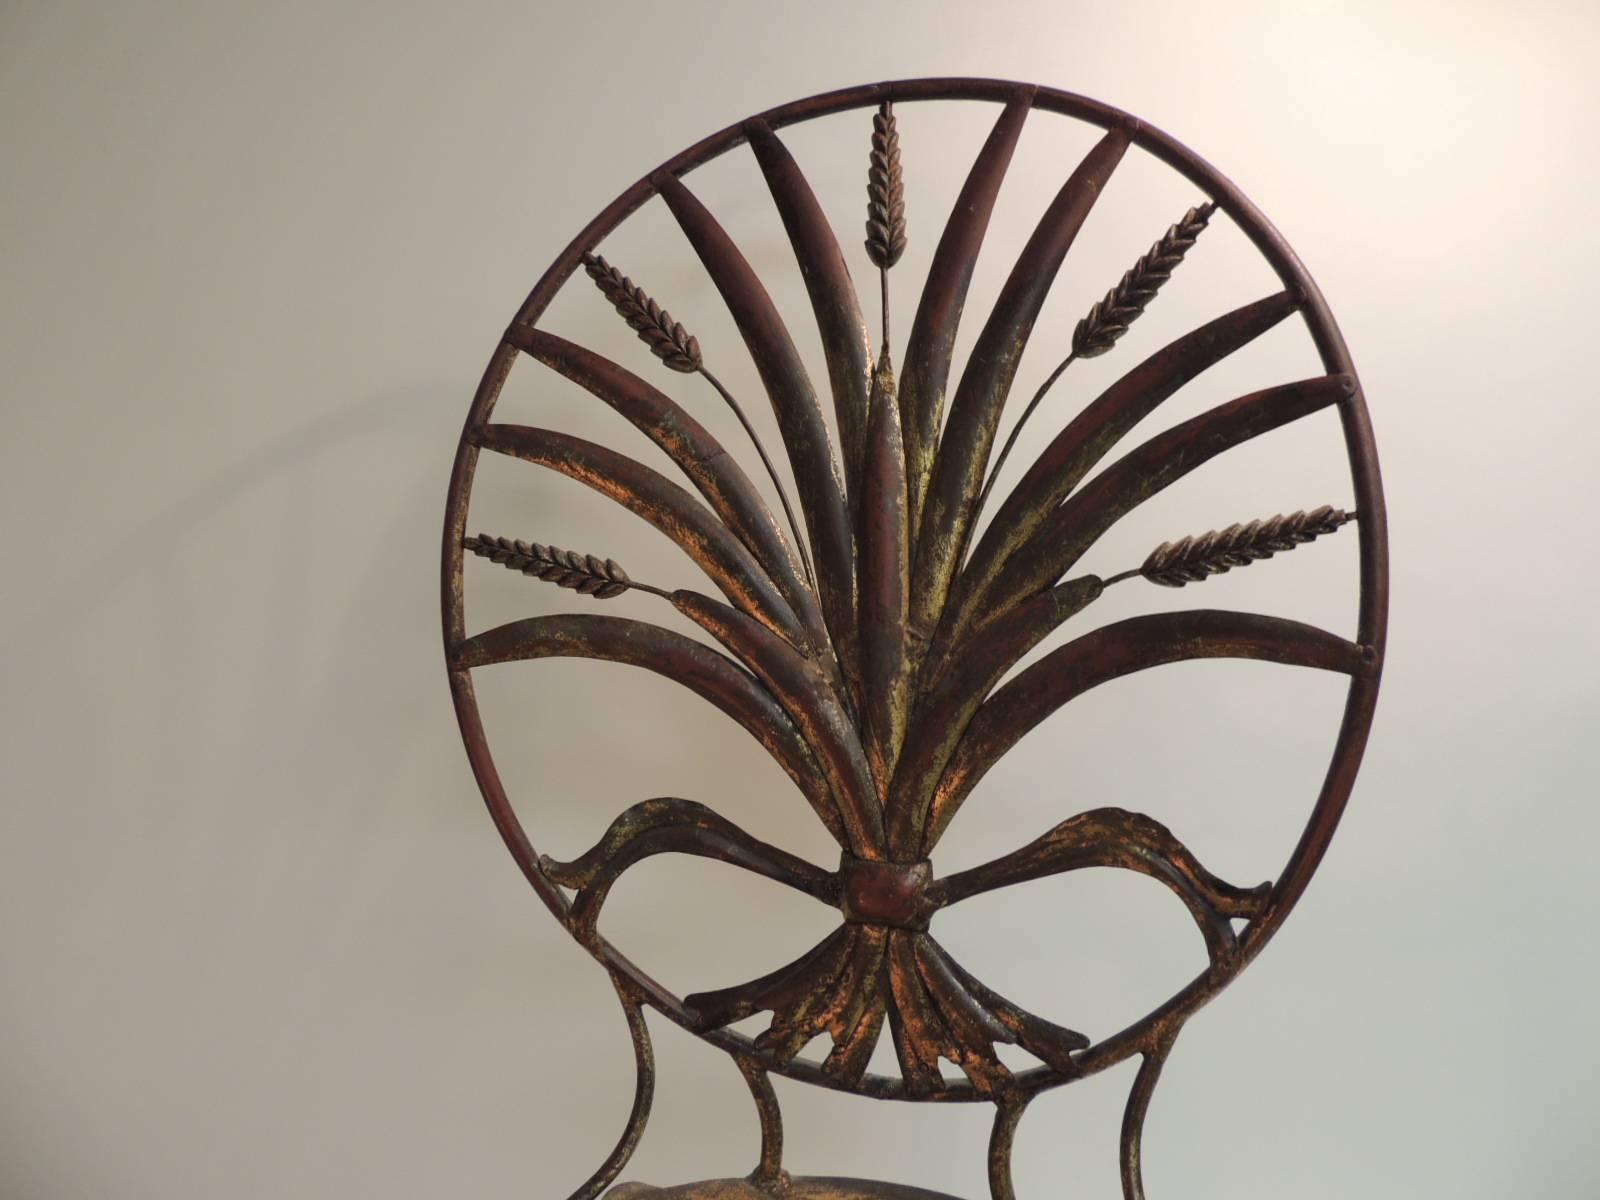 Hollywood Regency style Italian gilt metal wheat sheaf chair.
Single metal bistro chair with gilded metal finish in the Hollywood Regency style. The back of this vintage single chair is an oval containing a fanned out sheaf of wheat design.